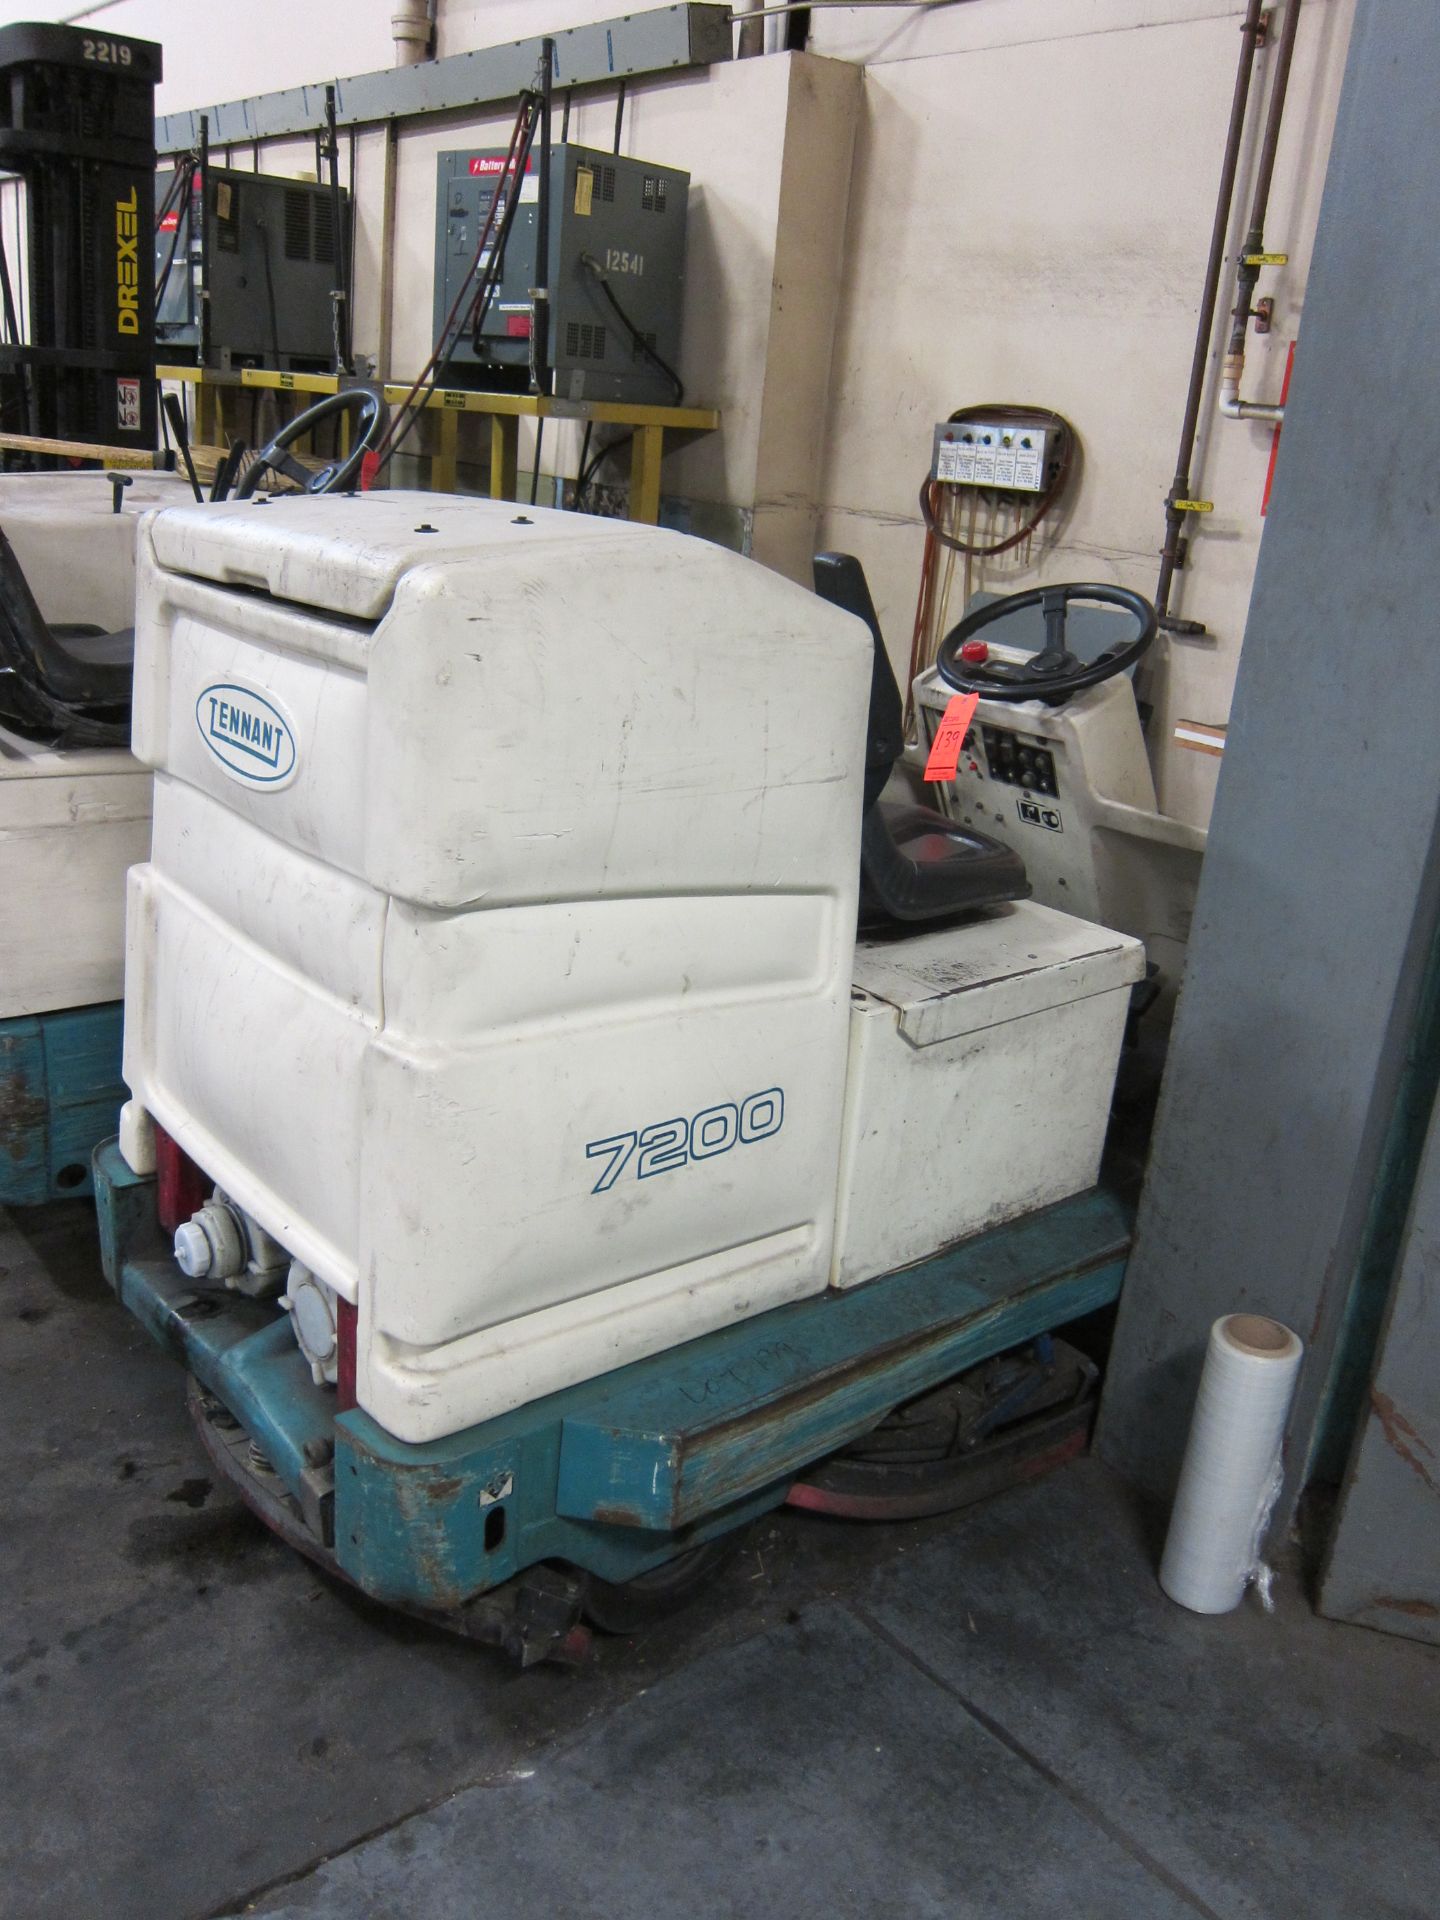 Tennant m/n 7200 electric floor scrubber/sweeper, 3308 hrs.